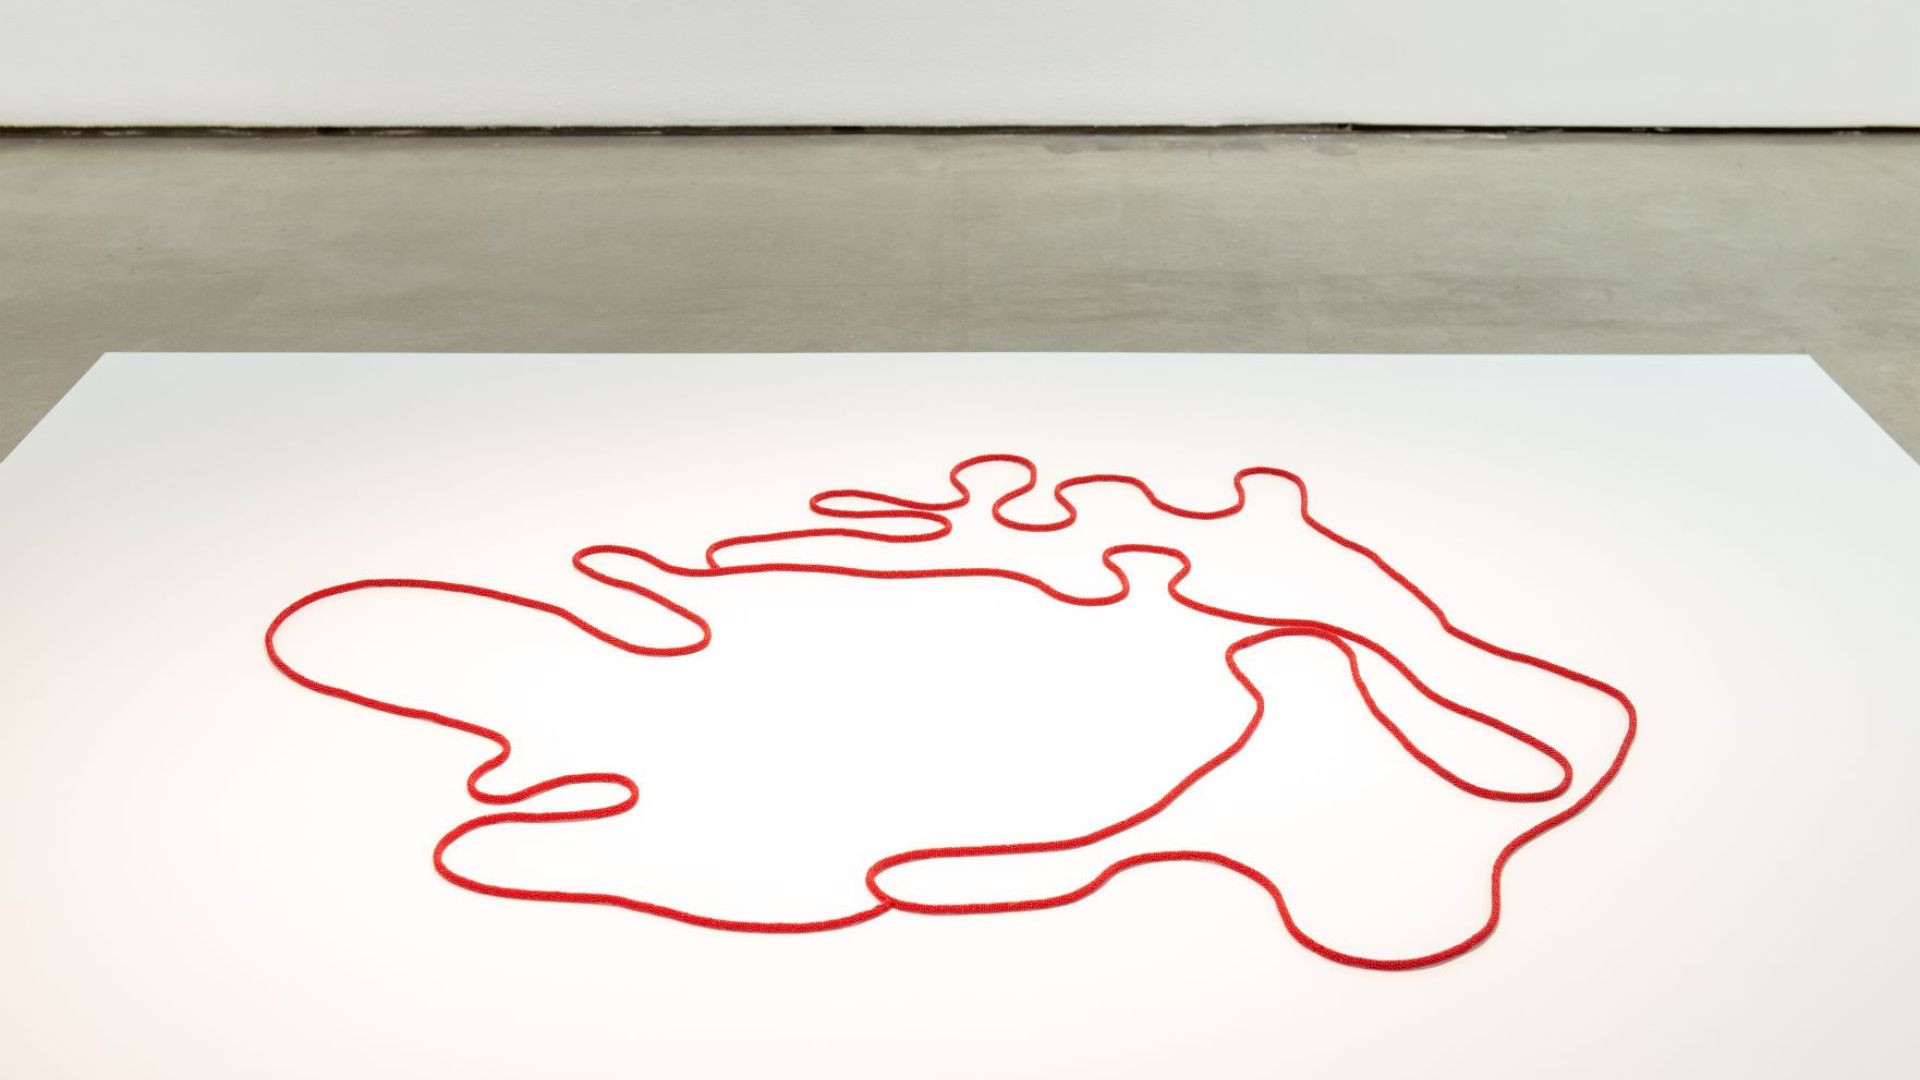 The Red Line by Faye HeavyShield is exhibited at the Pulitzer Arts Foundation.